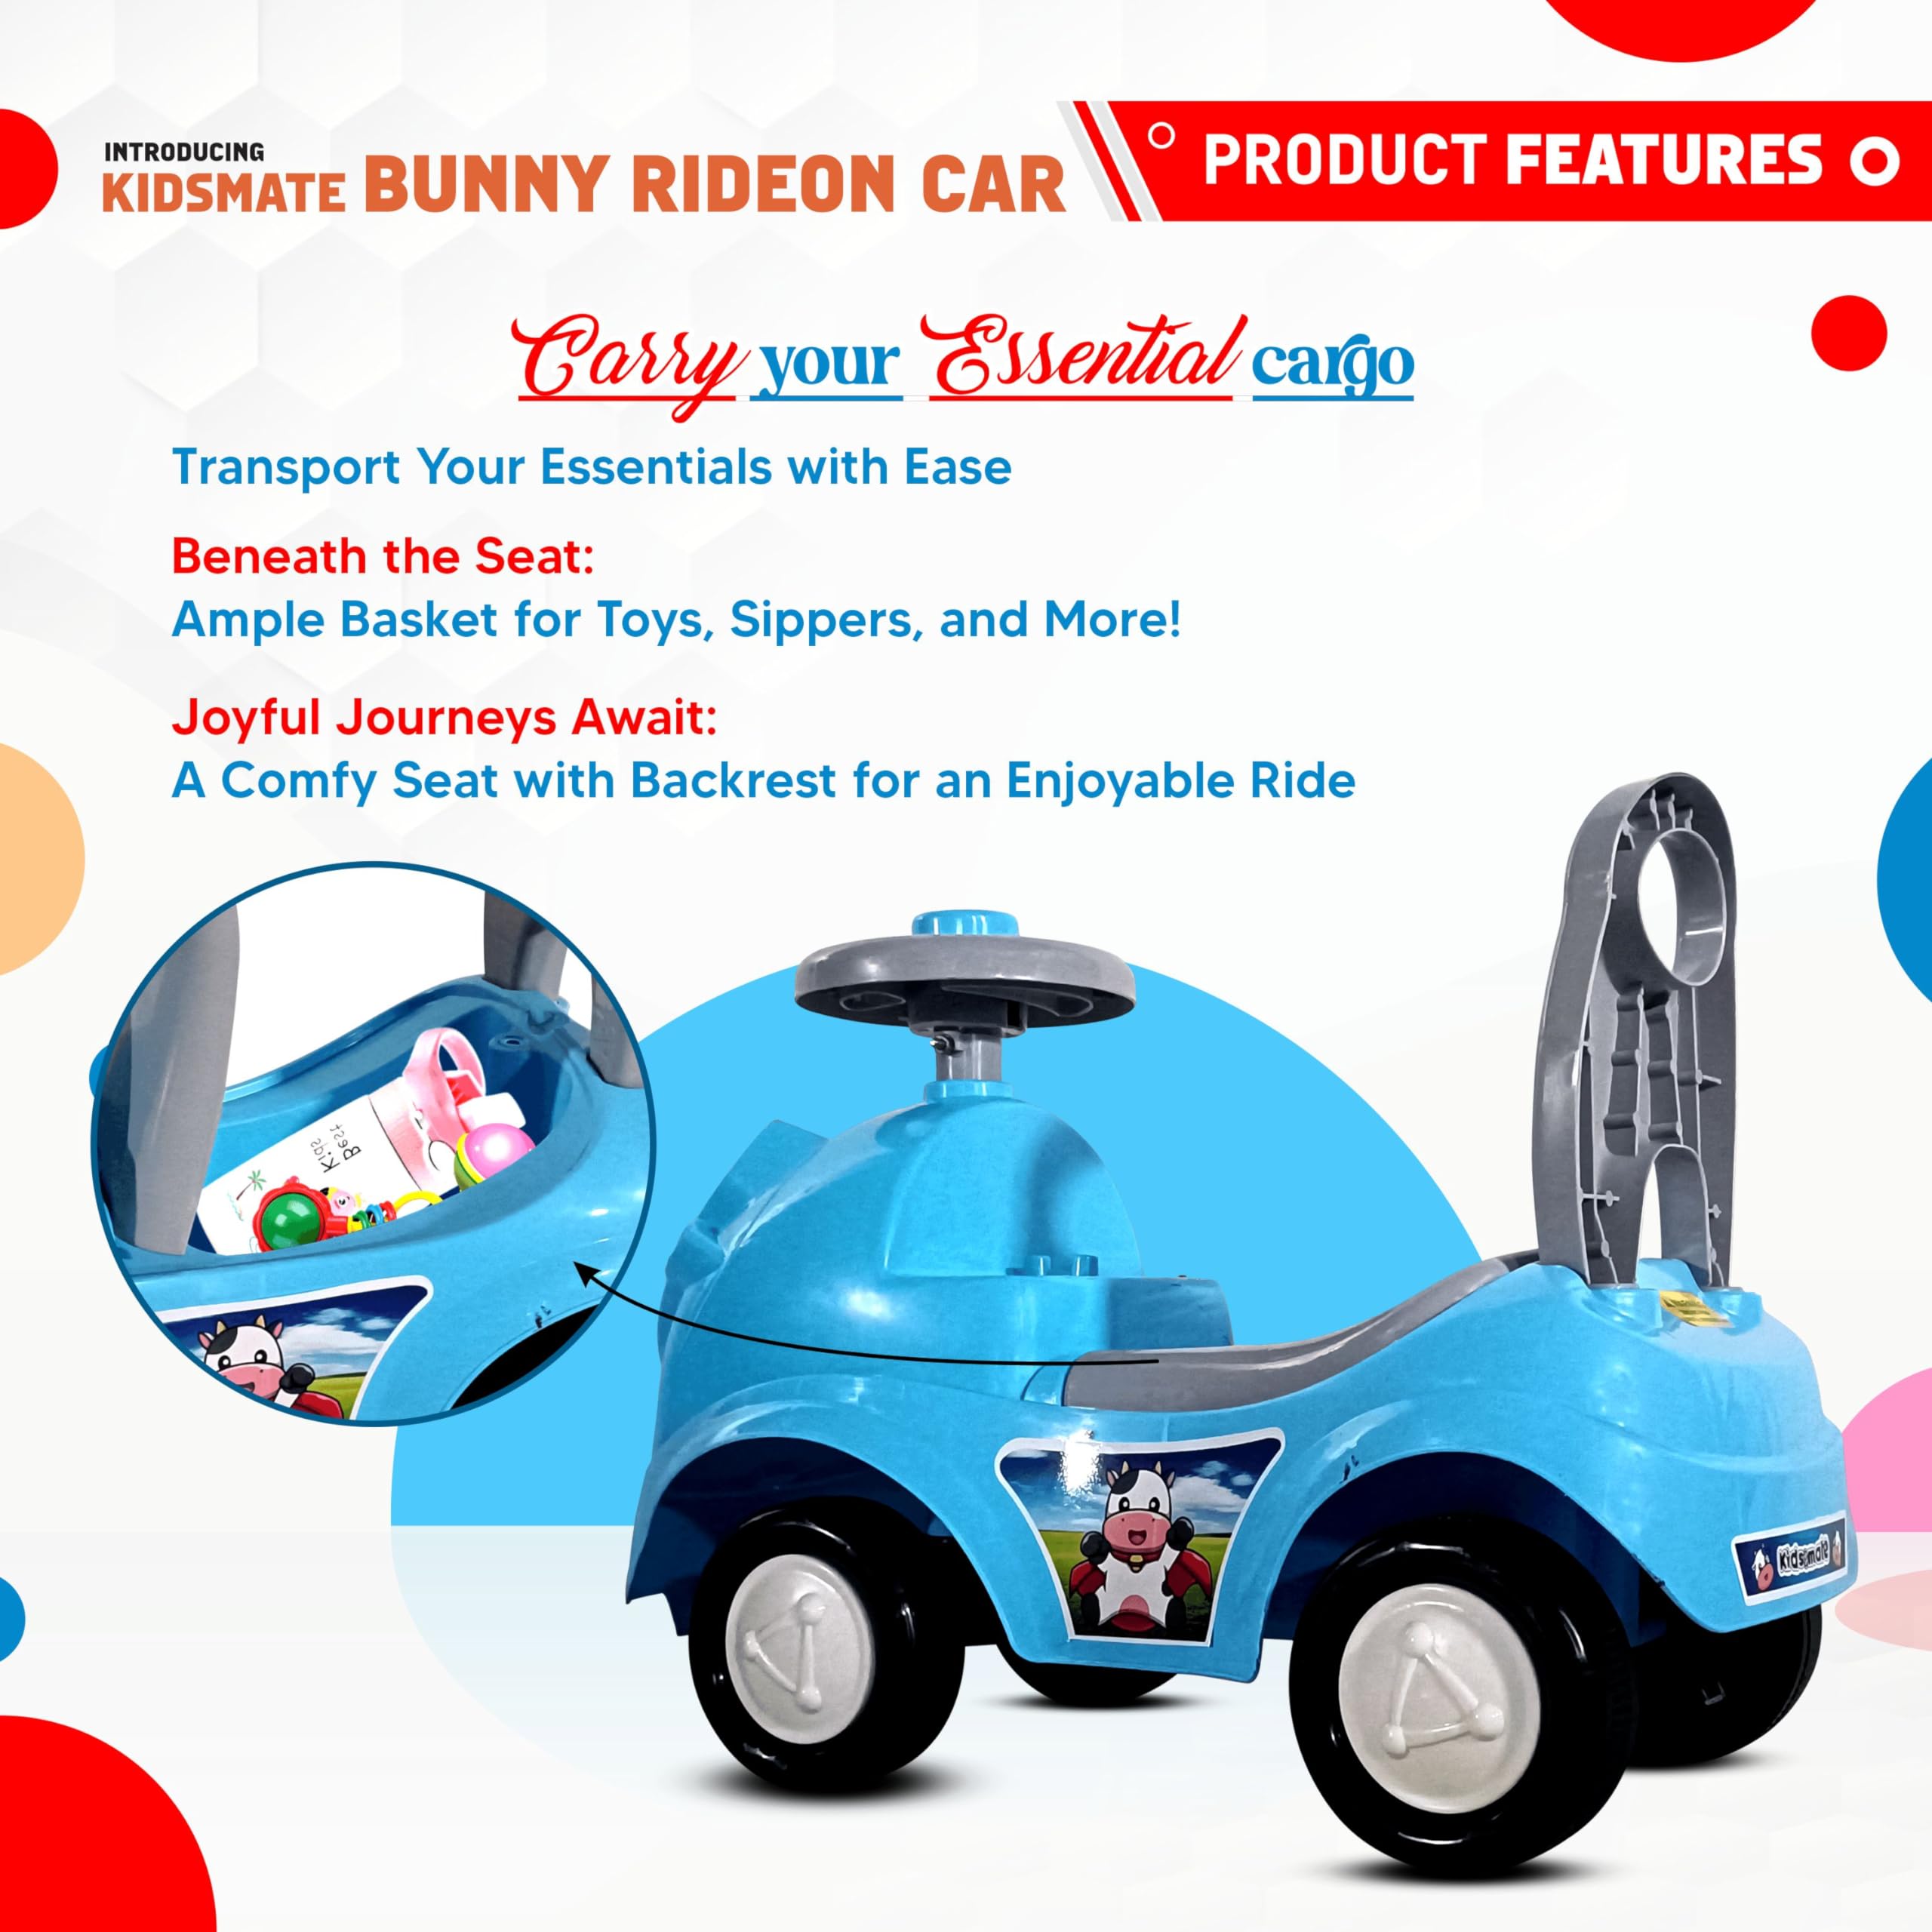 Kidsmate Bunny Ride On Car with Music & Horn - Safe and Fun Push Car for Babies (1-3 Years) | Backrest, Storage, and Big Wheels | Perfect Toddler Ride-On Toy (Sea Green)